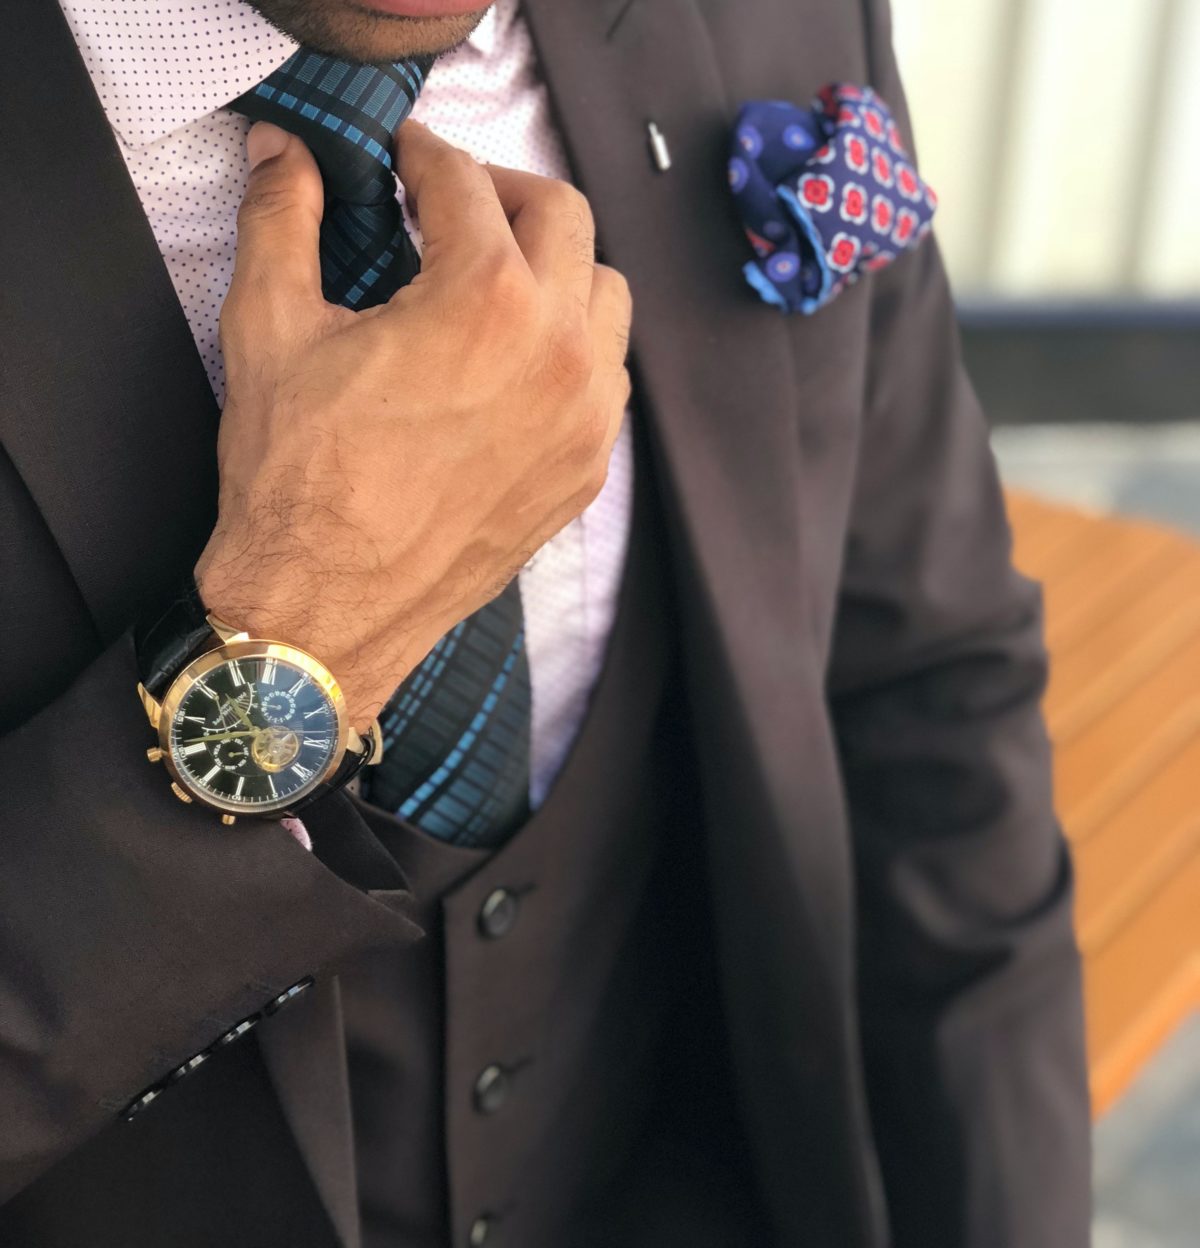 A man formally dressed with a fancy watch and a pocket handkerchief.